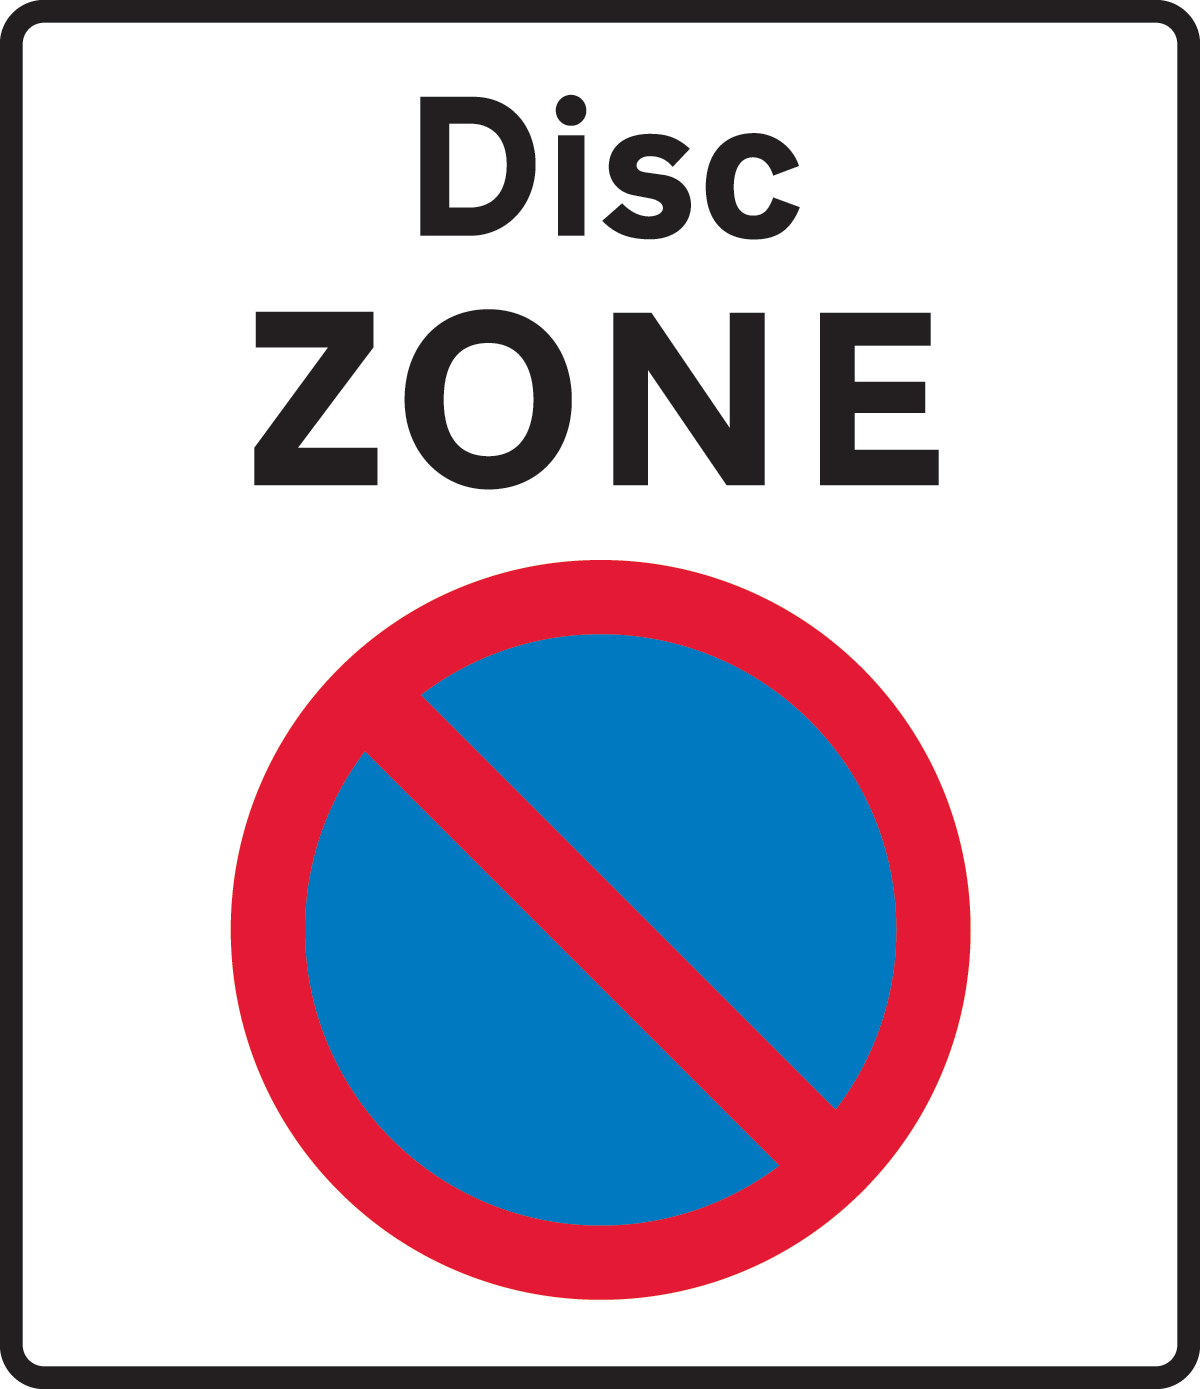 https://theorytest.org.uk/wp-content/uploads/2021/01/disc-parking-zone-sign.png